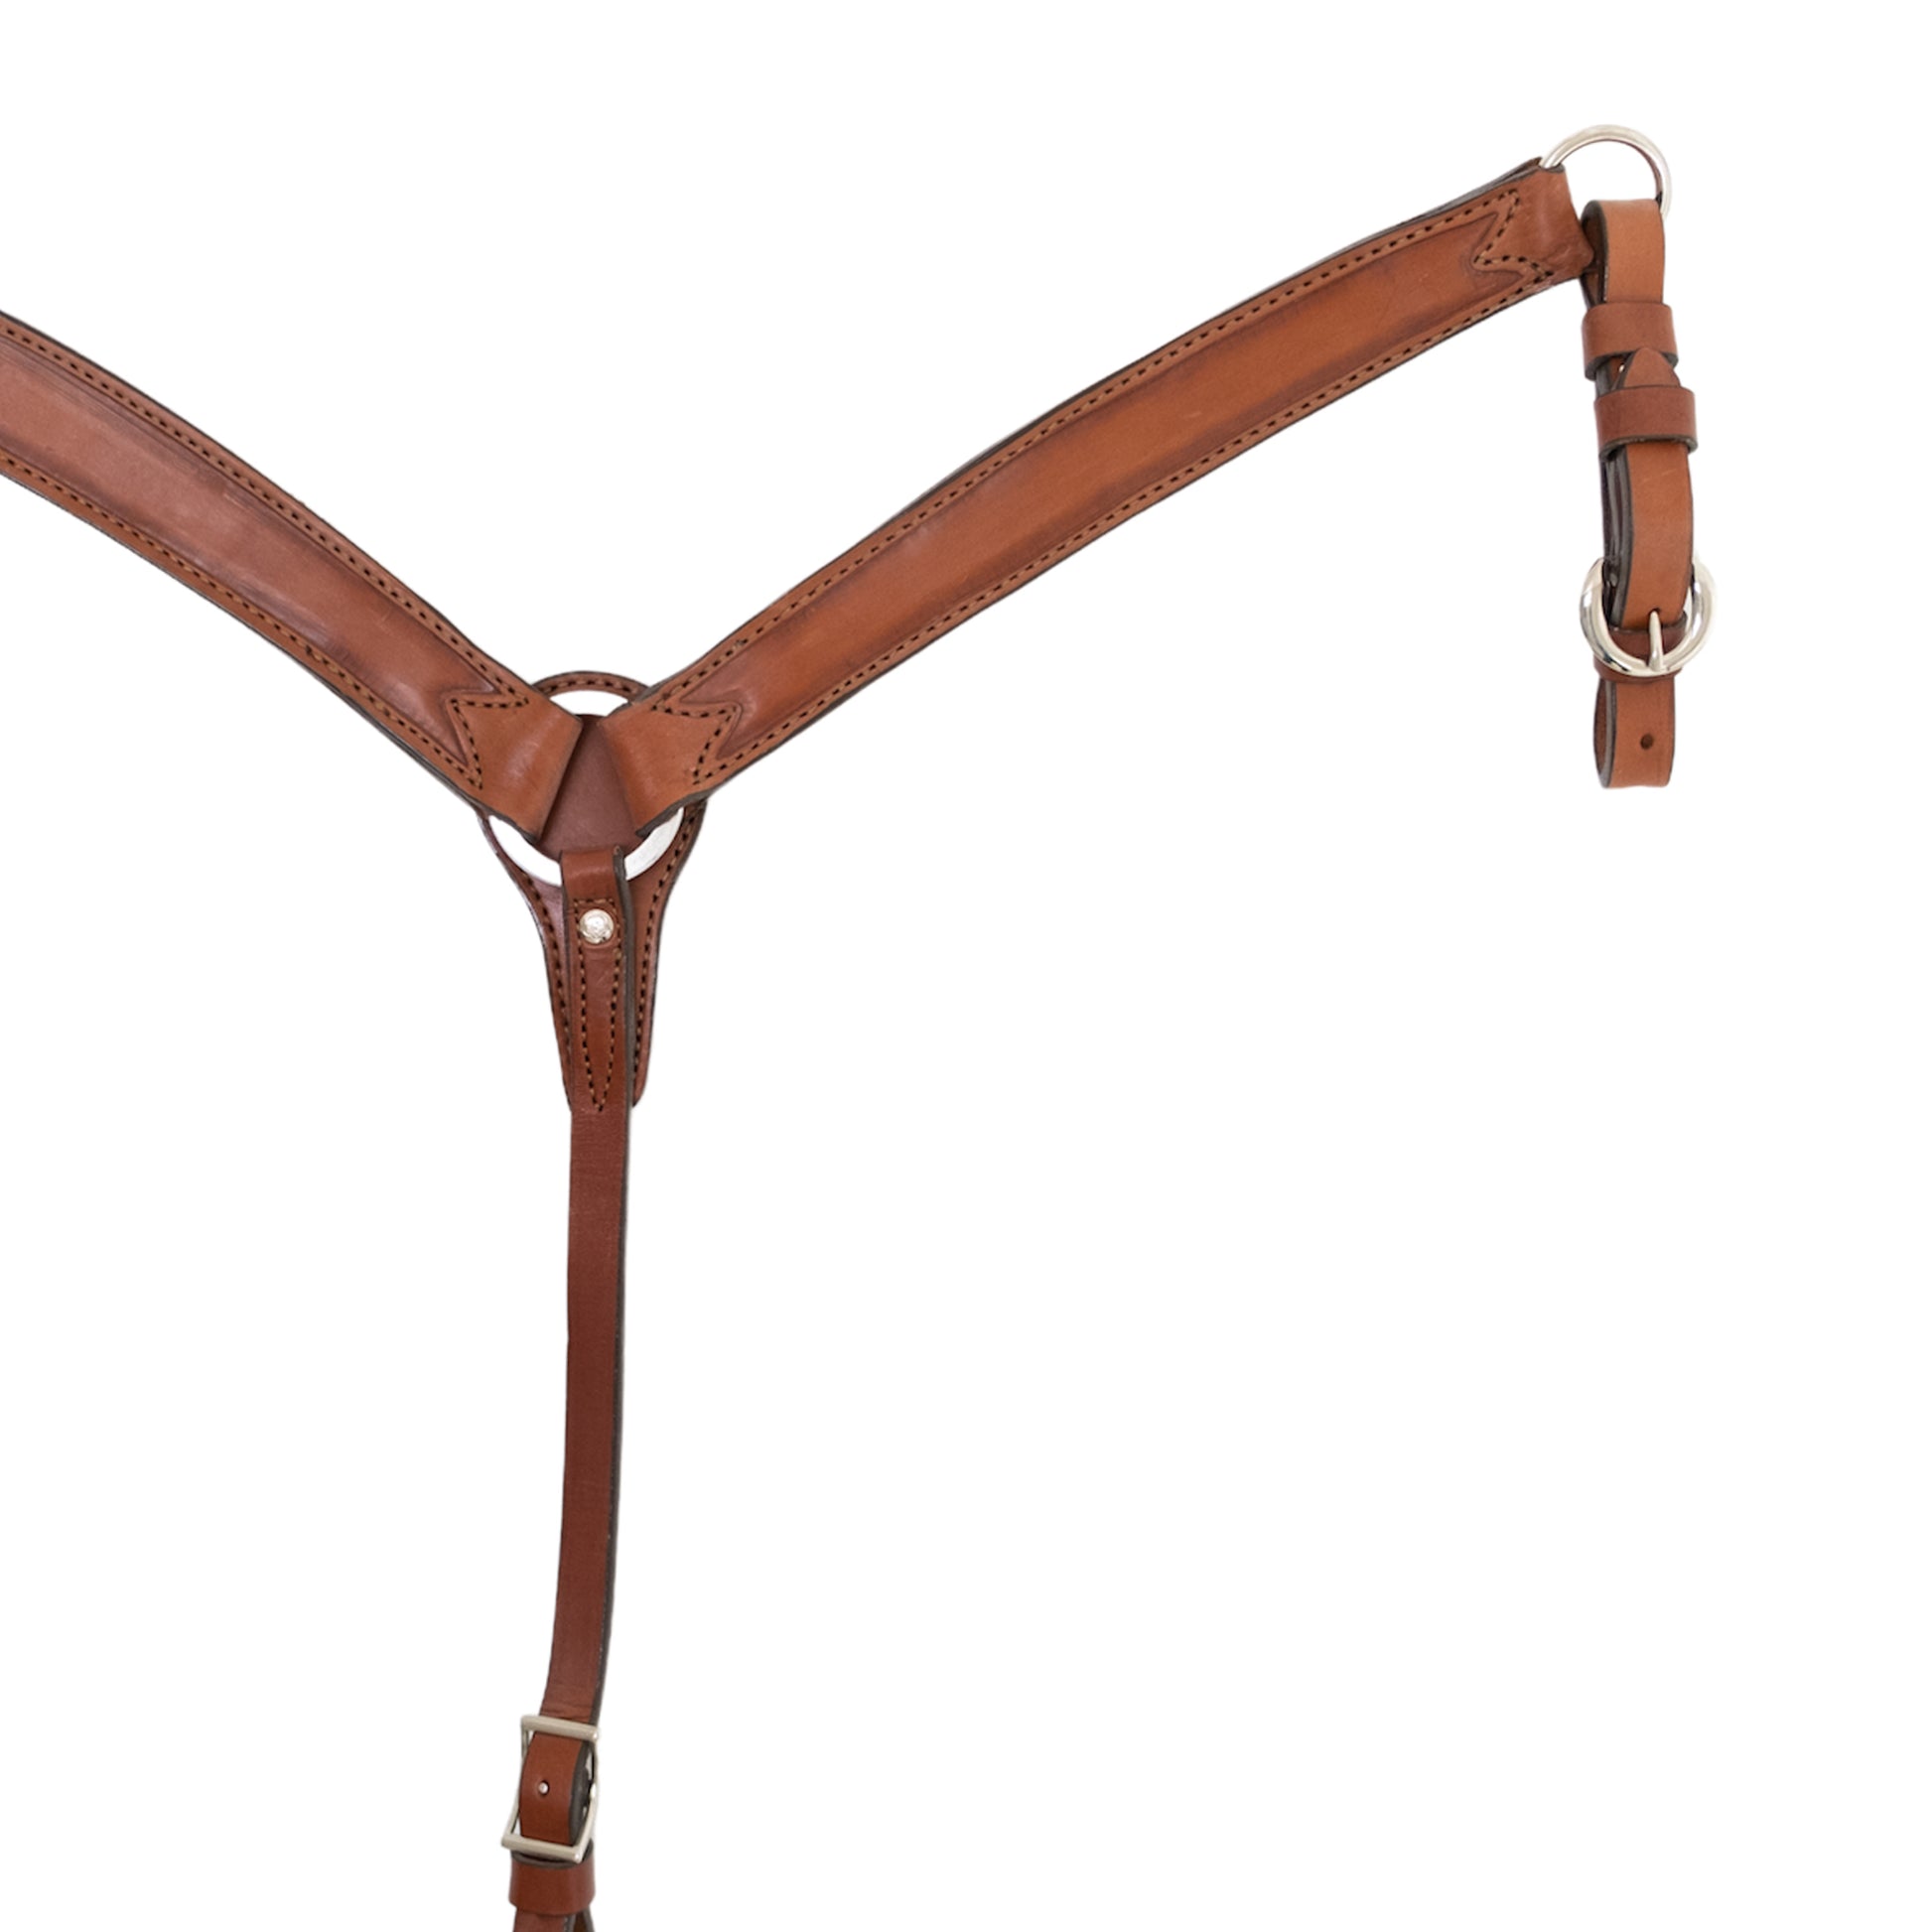 1" Pony breast collar toast leather outline tooling with brown stitching. 